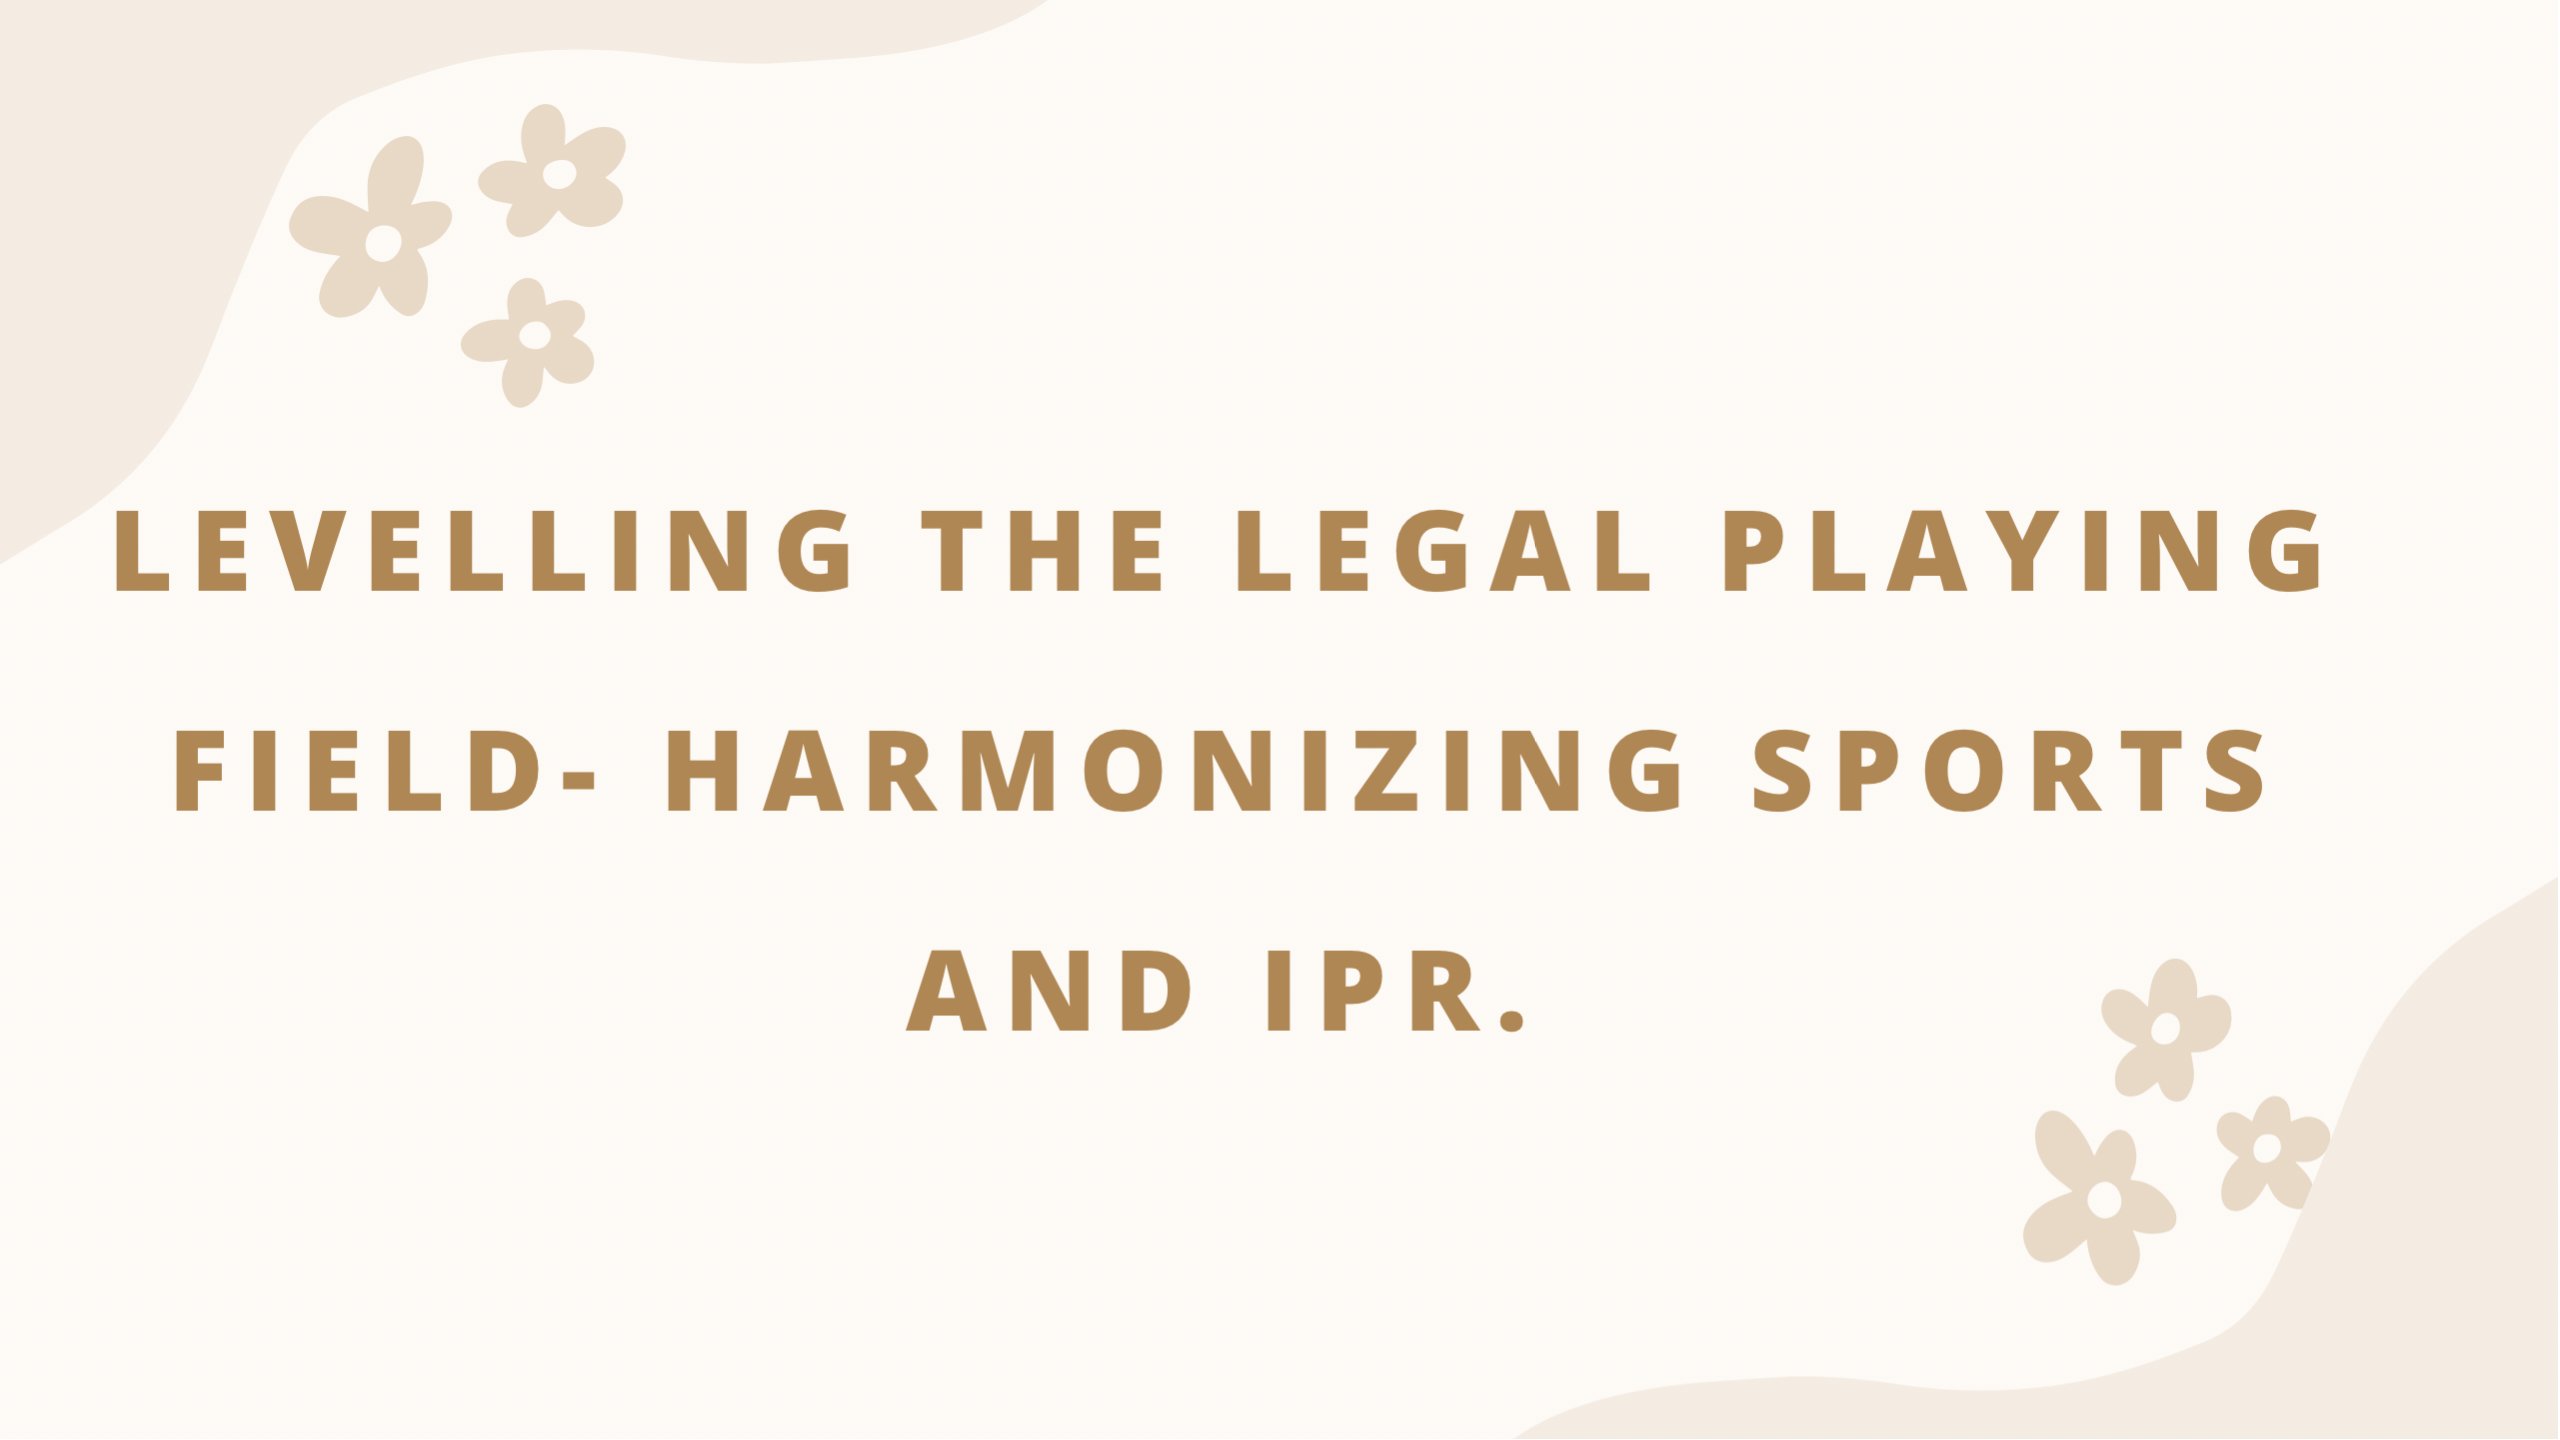 LEVELLING THE LEGAL PLAYING FIELD- HARMONIZING SPORTS AND IPR